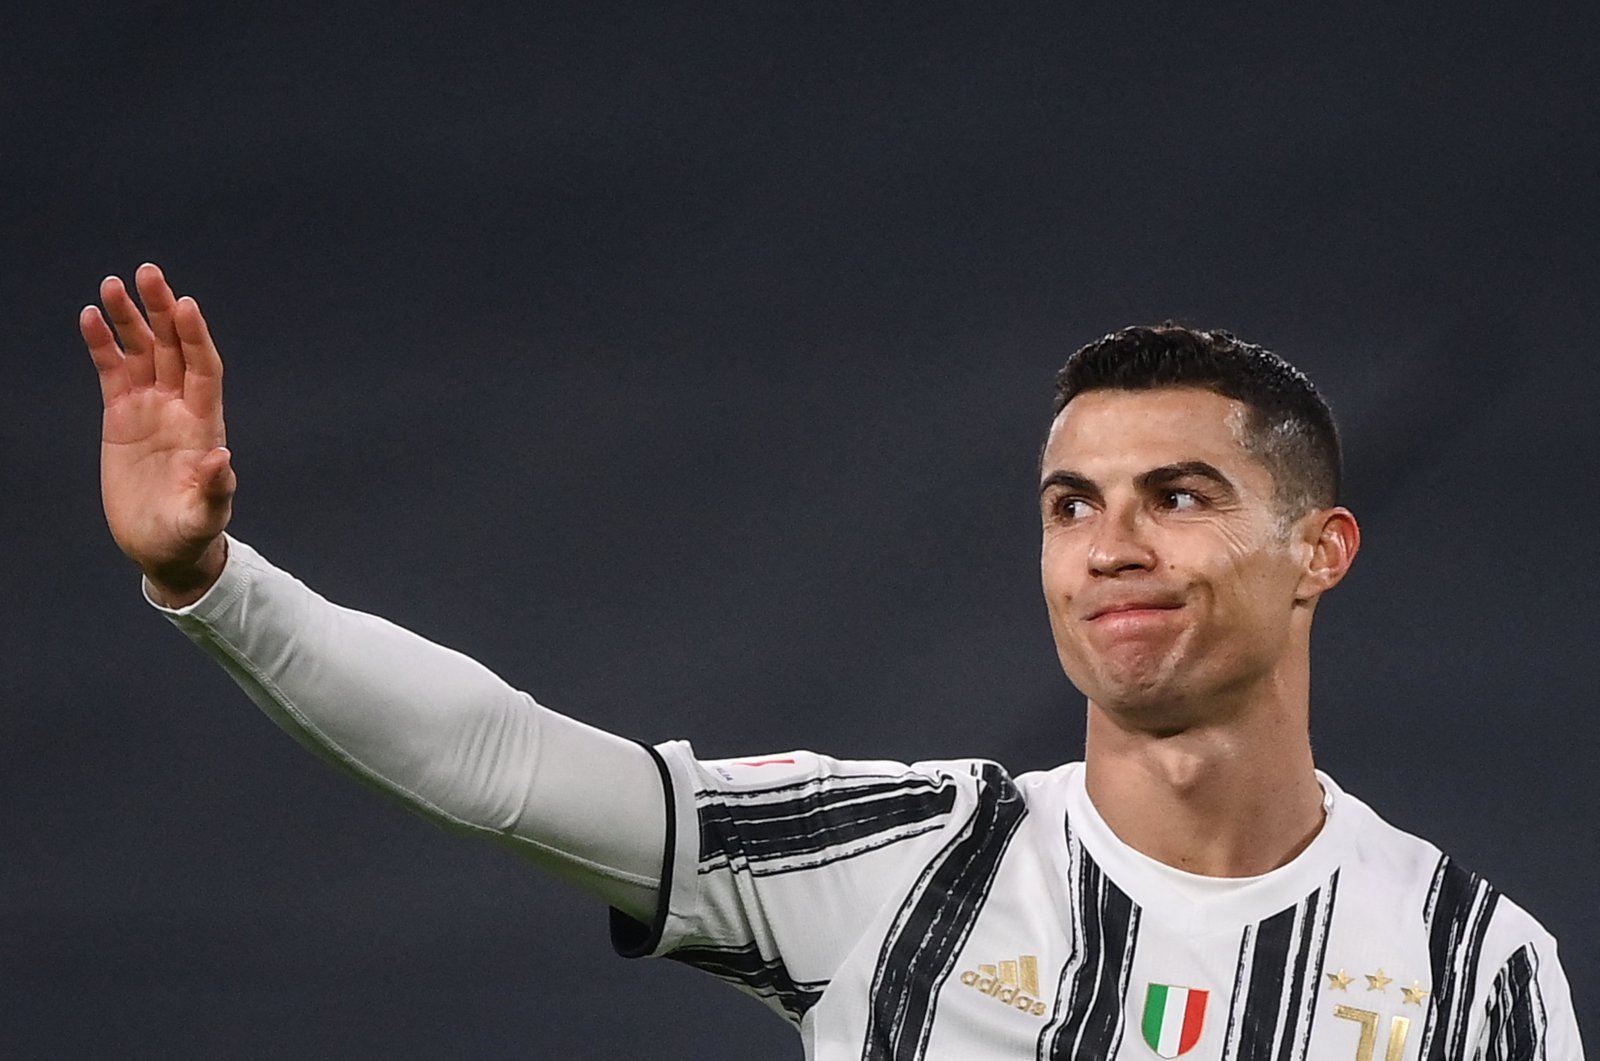 Juventus' Cristiano Ronaldo reacts during an Italian Cup semifinal match against Inter Milan, in Turin, Italy, Feb. 9, 2021. (AFP Photo)
